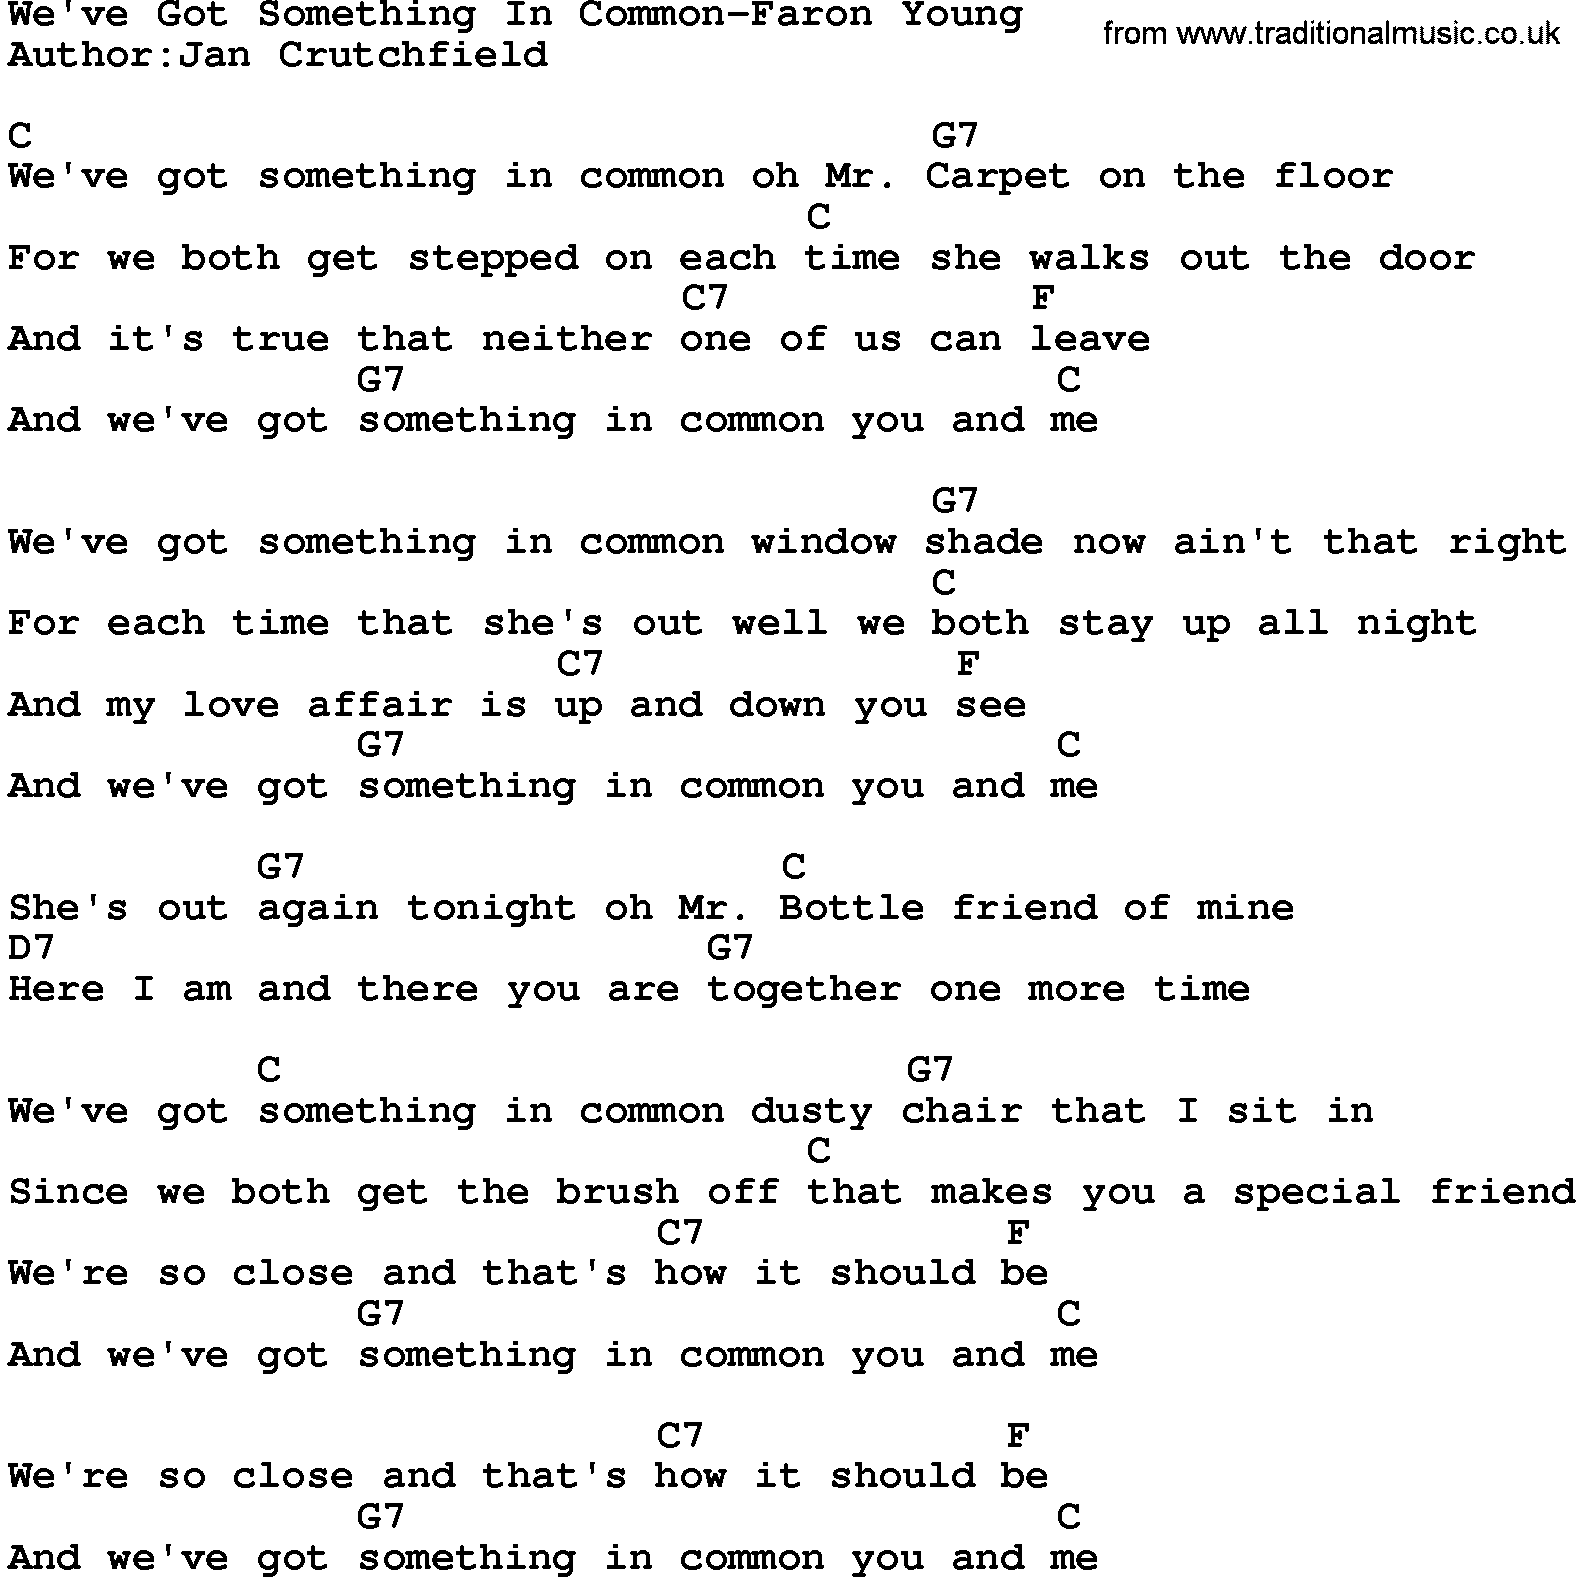 Country music song: We've Got Something In Common-Faron Young lyrics and chords